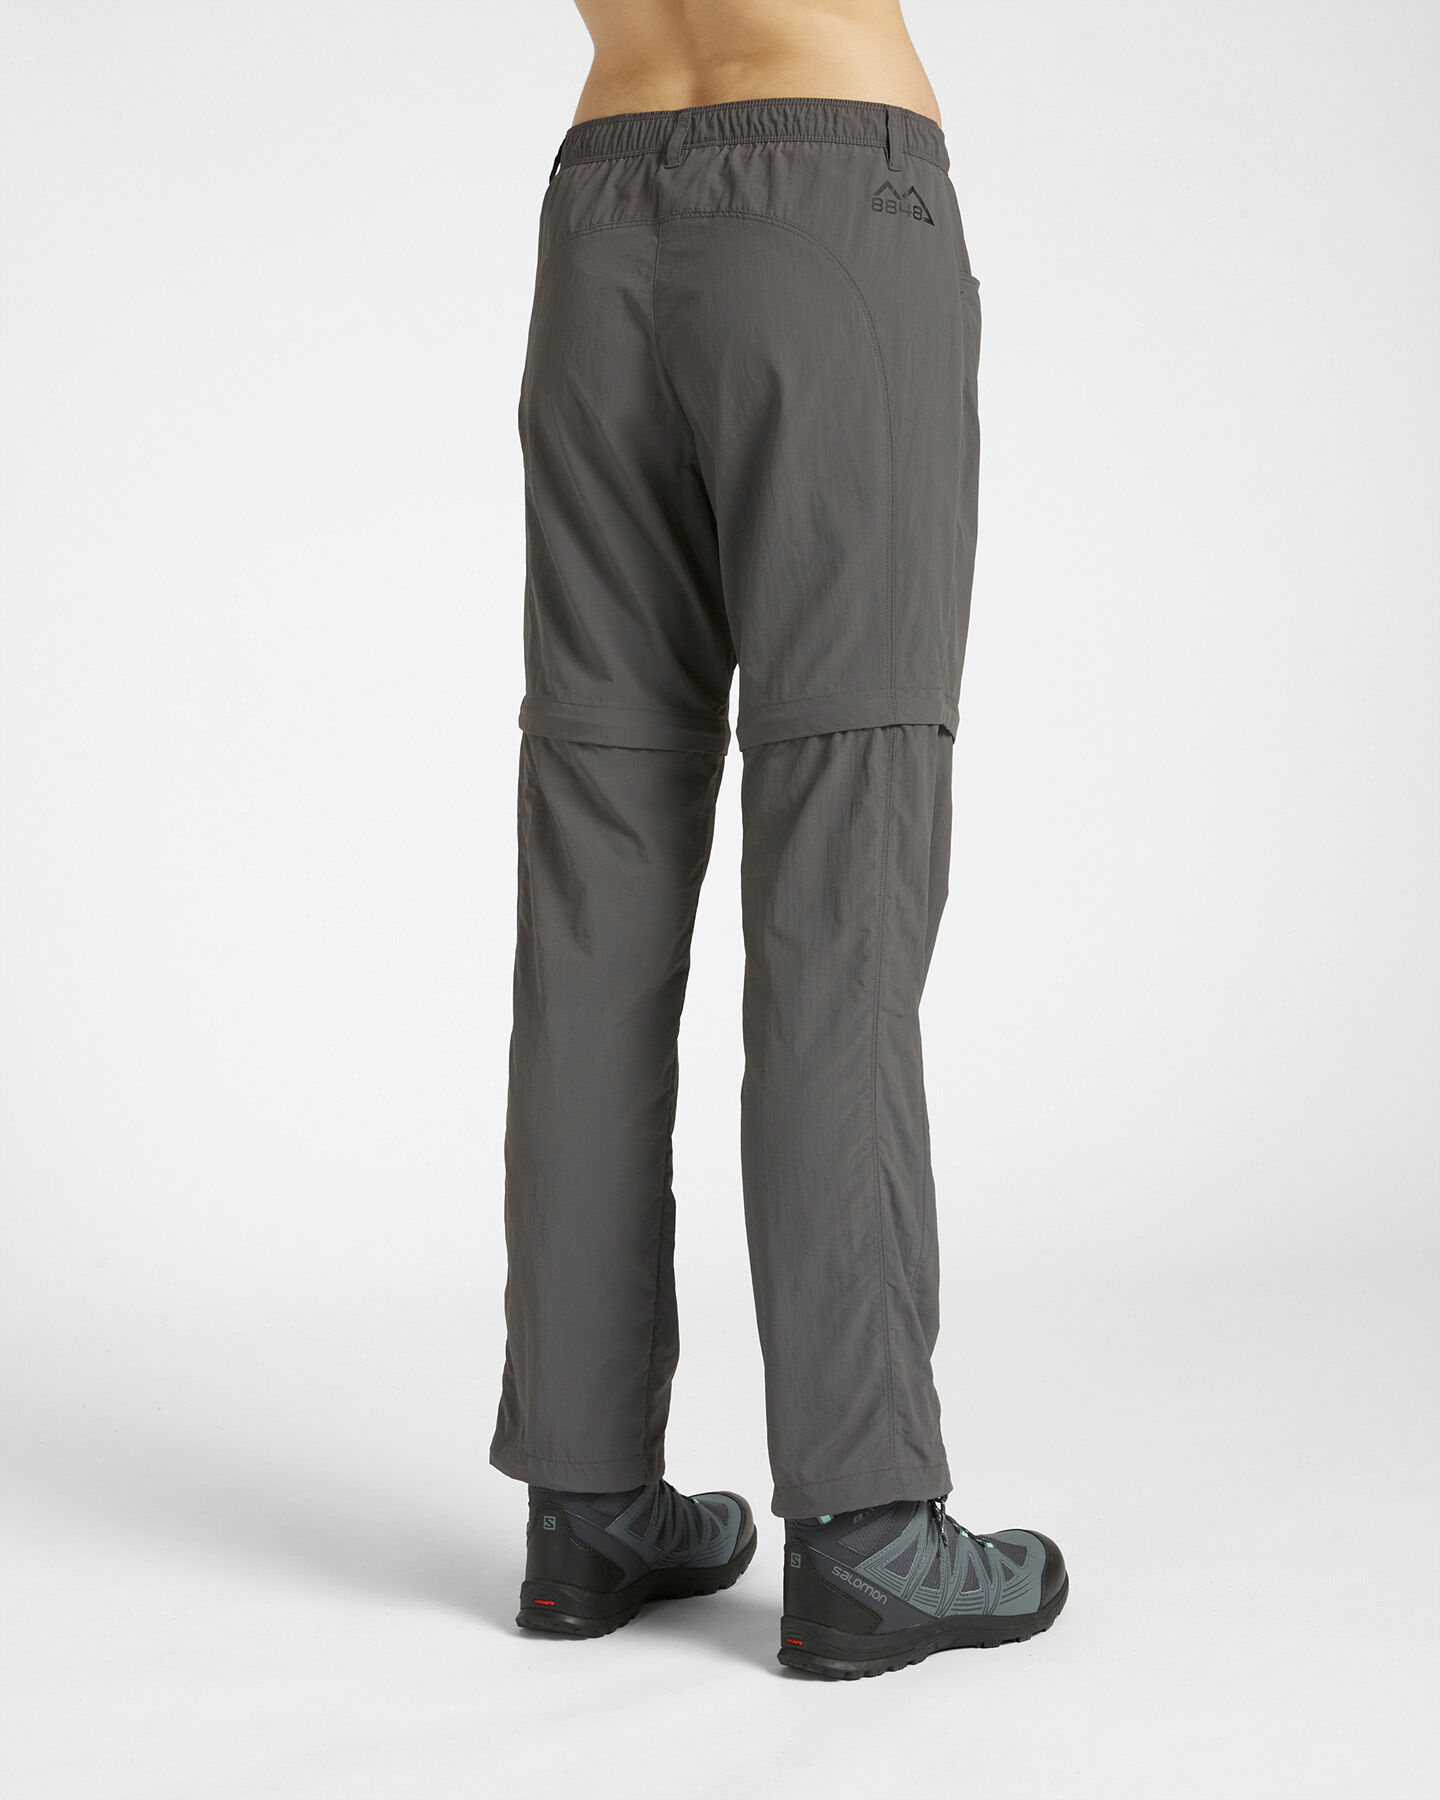  Pantalone outdoor 8848 MOUNTAIN ESSENTIAL W S4120735|986|S scatto 1